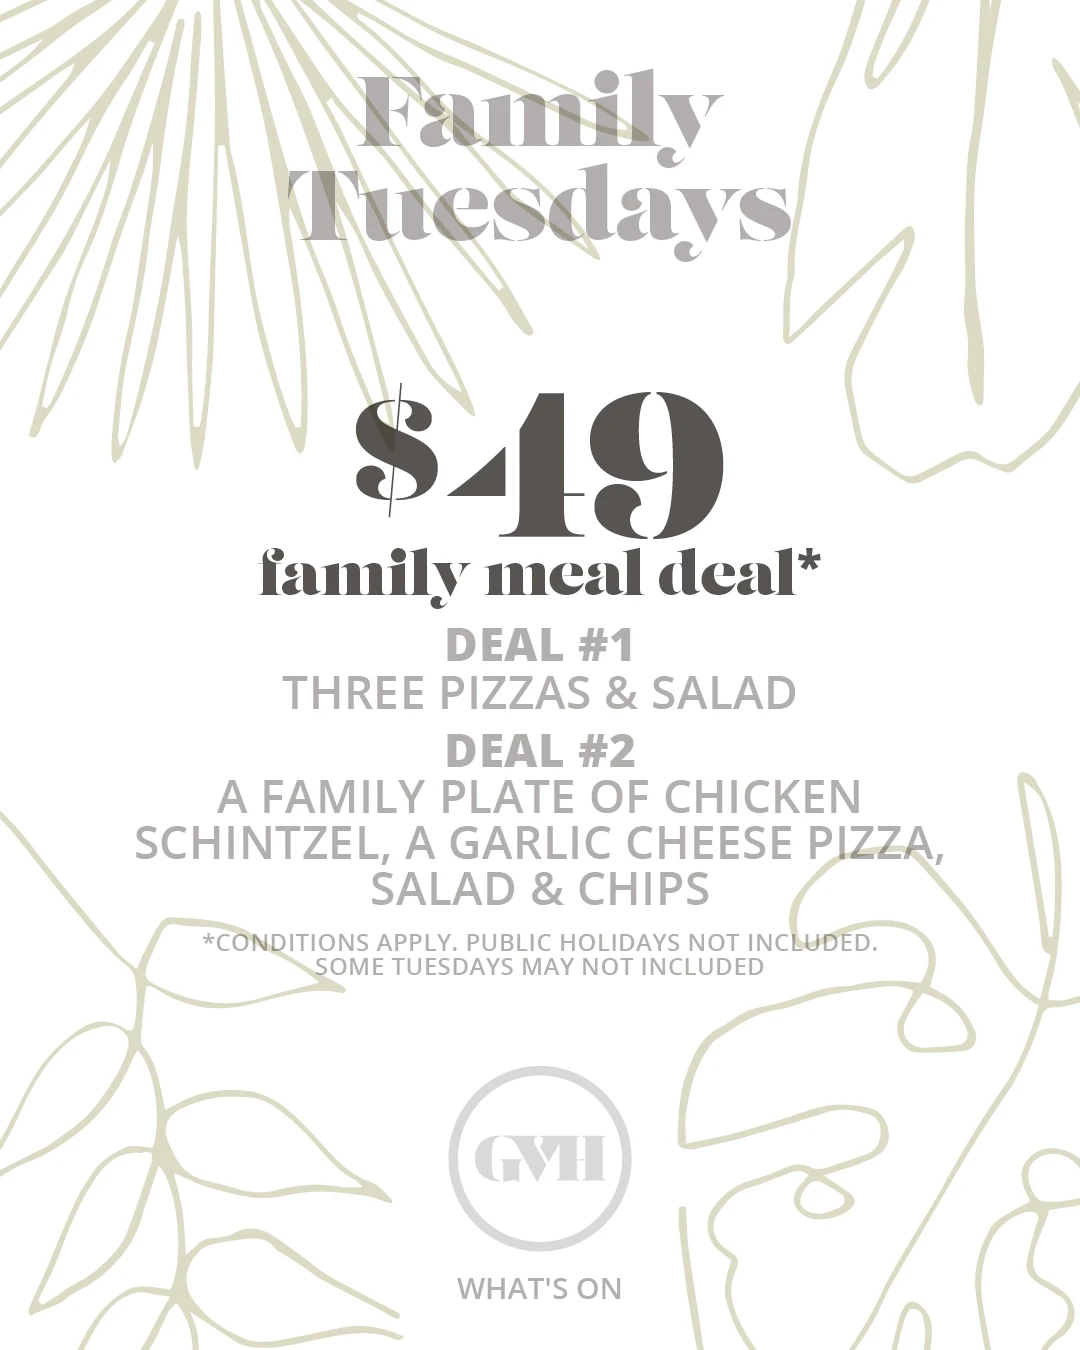 family special on tuesdays at the green valley hotel